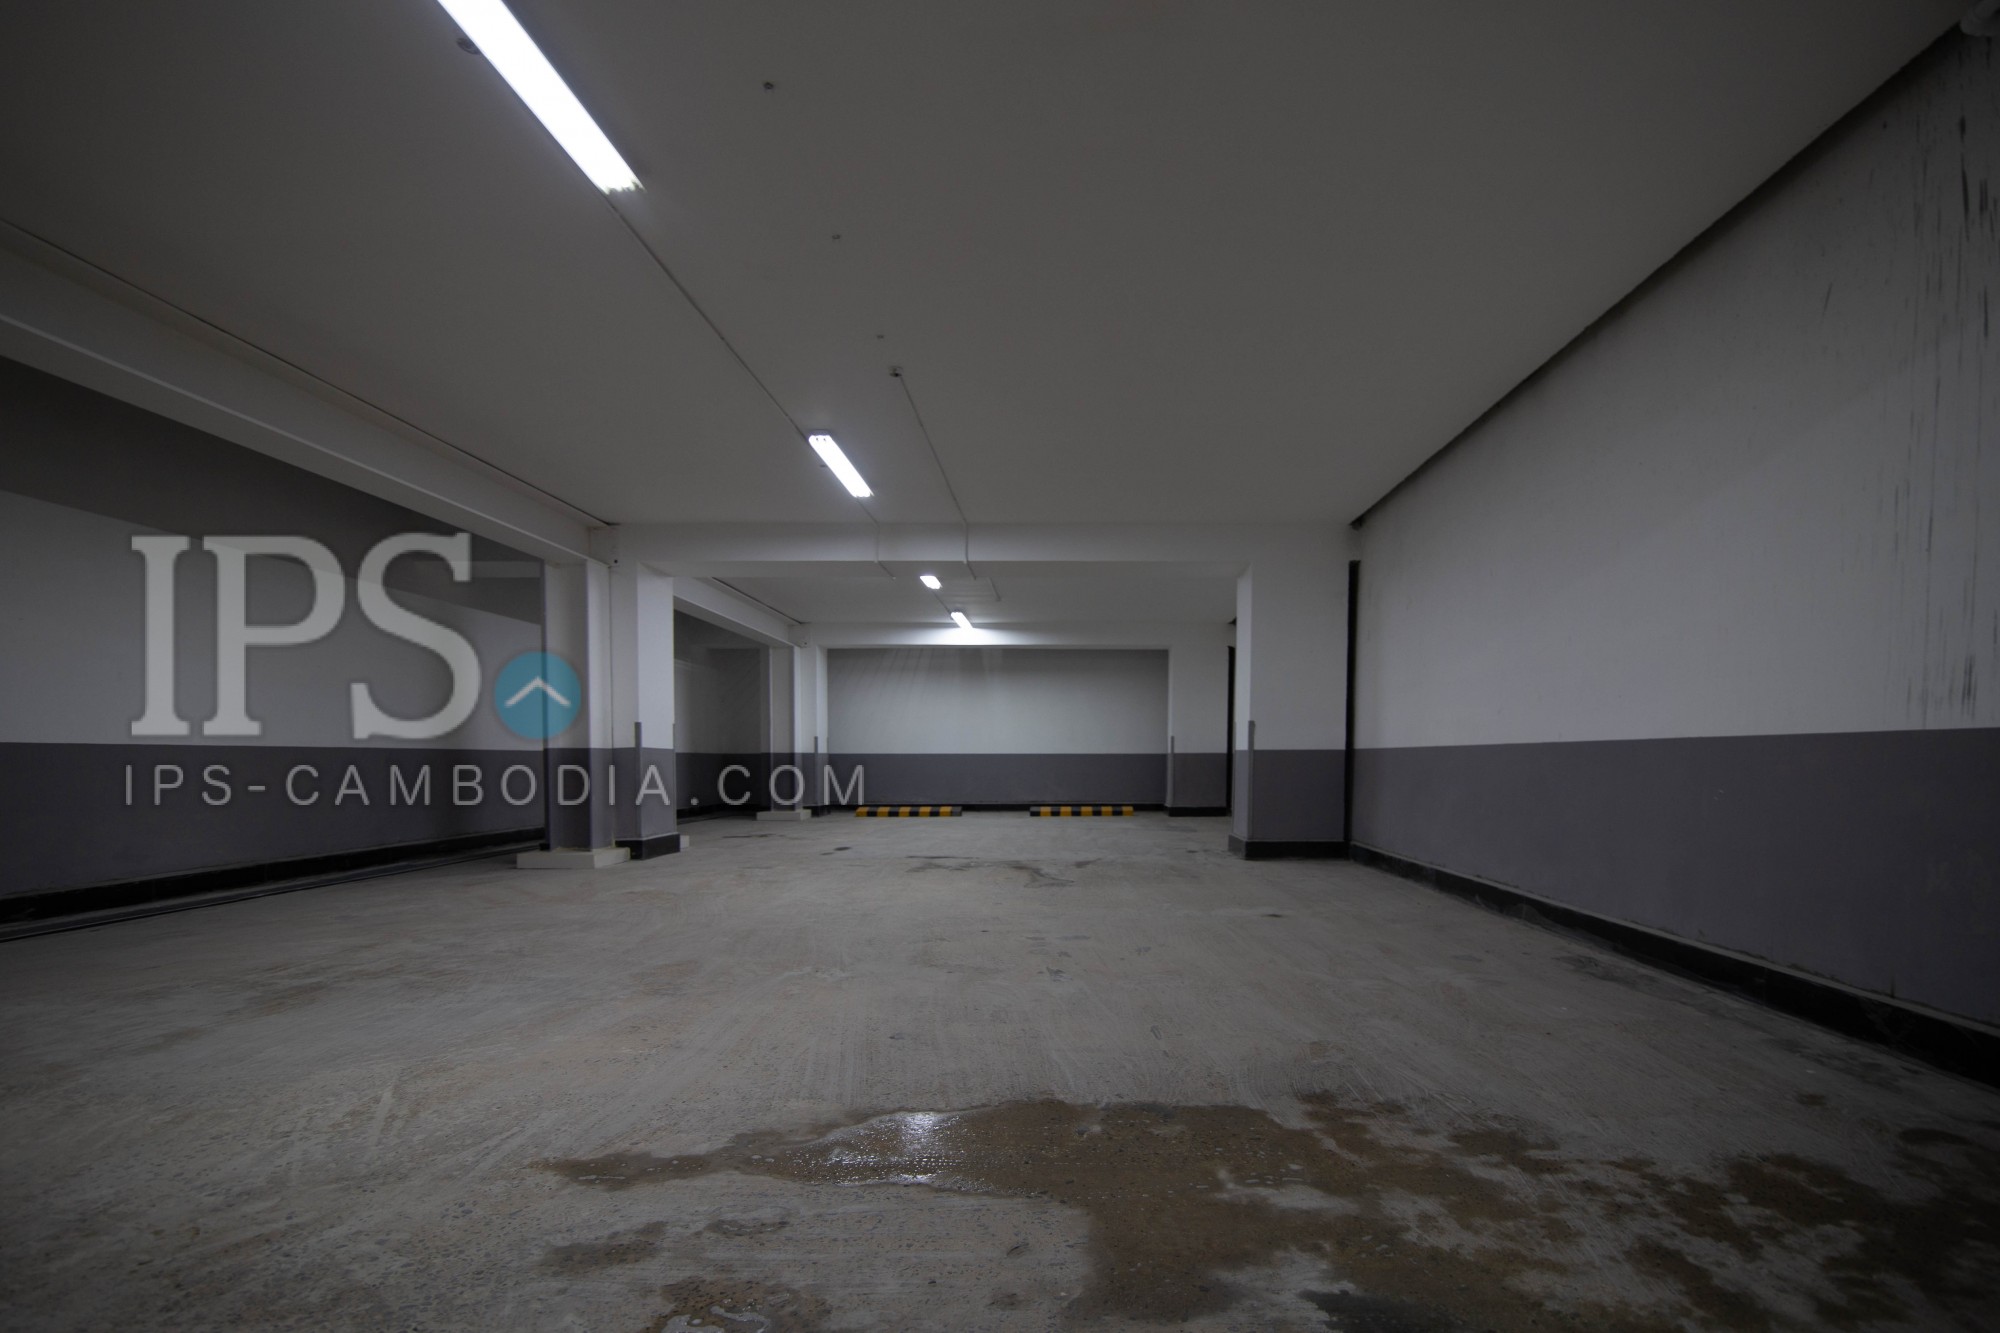 400 sq.m. Office Space For Rent - Tumnup Teuk, Phnom Penh thumbnail